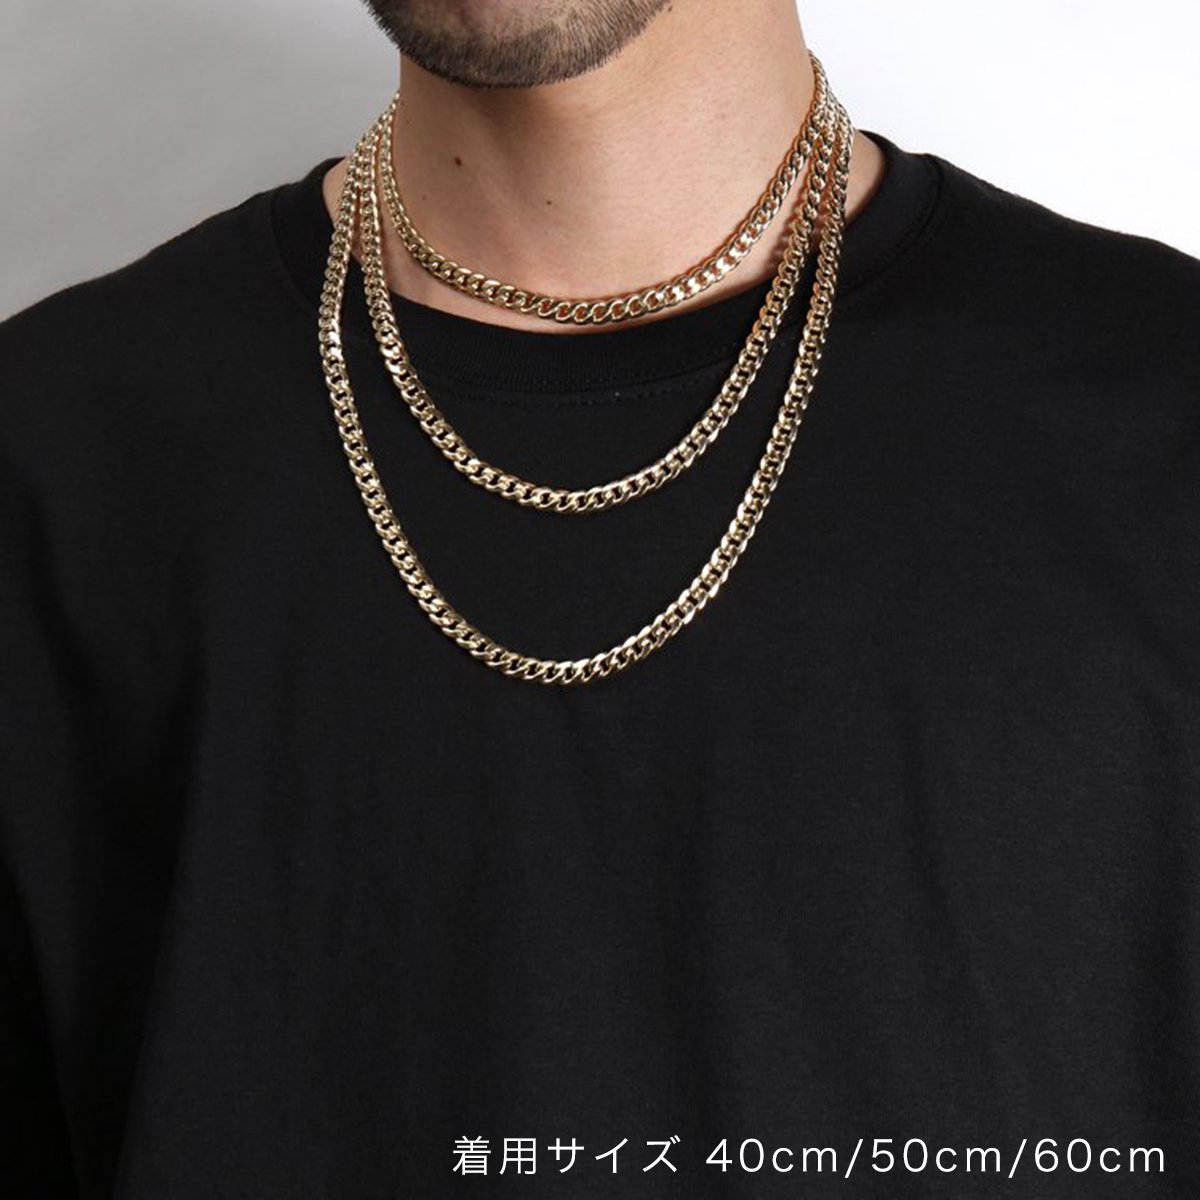 NECKLACE_DESIGN-マイアミキューバンリンク - AVALANCHE OFFICIAL STORE